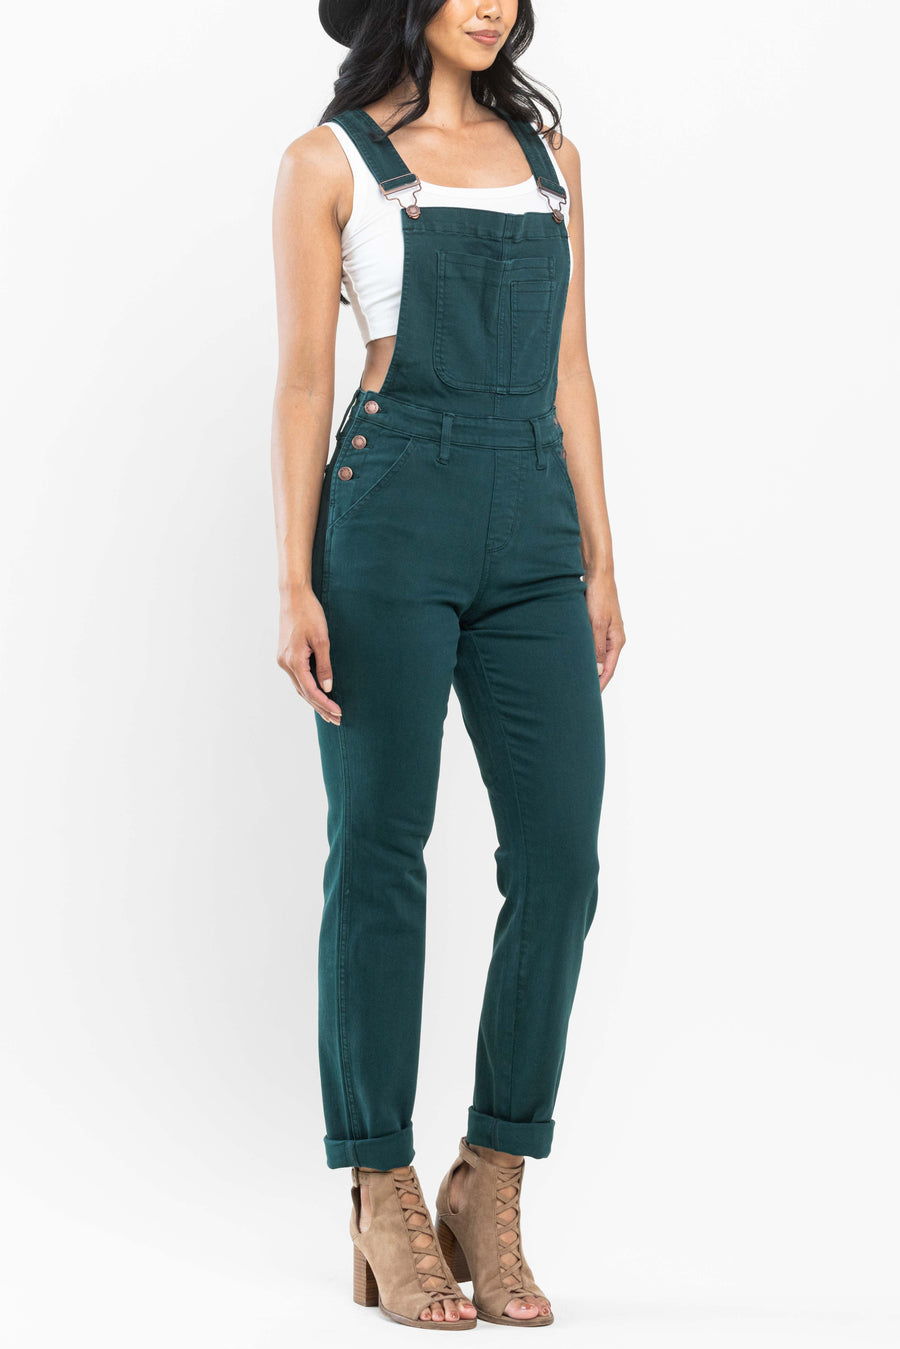 Naelly Teal Double Cuff Boyfriend Overall - PLUS